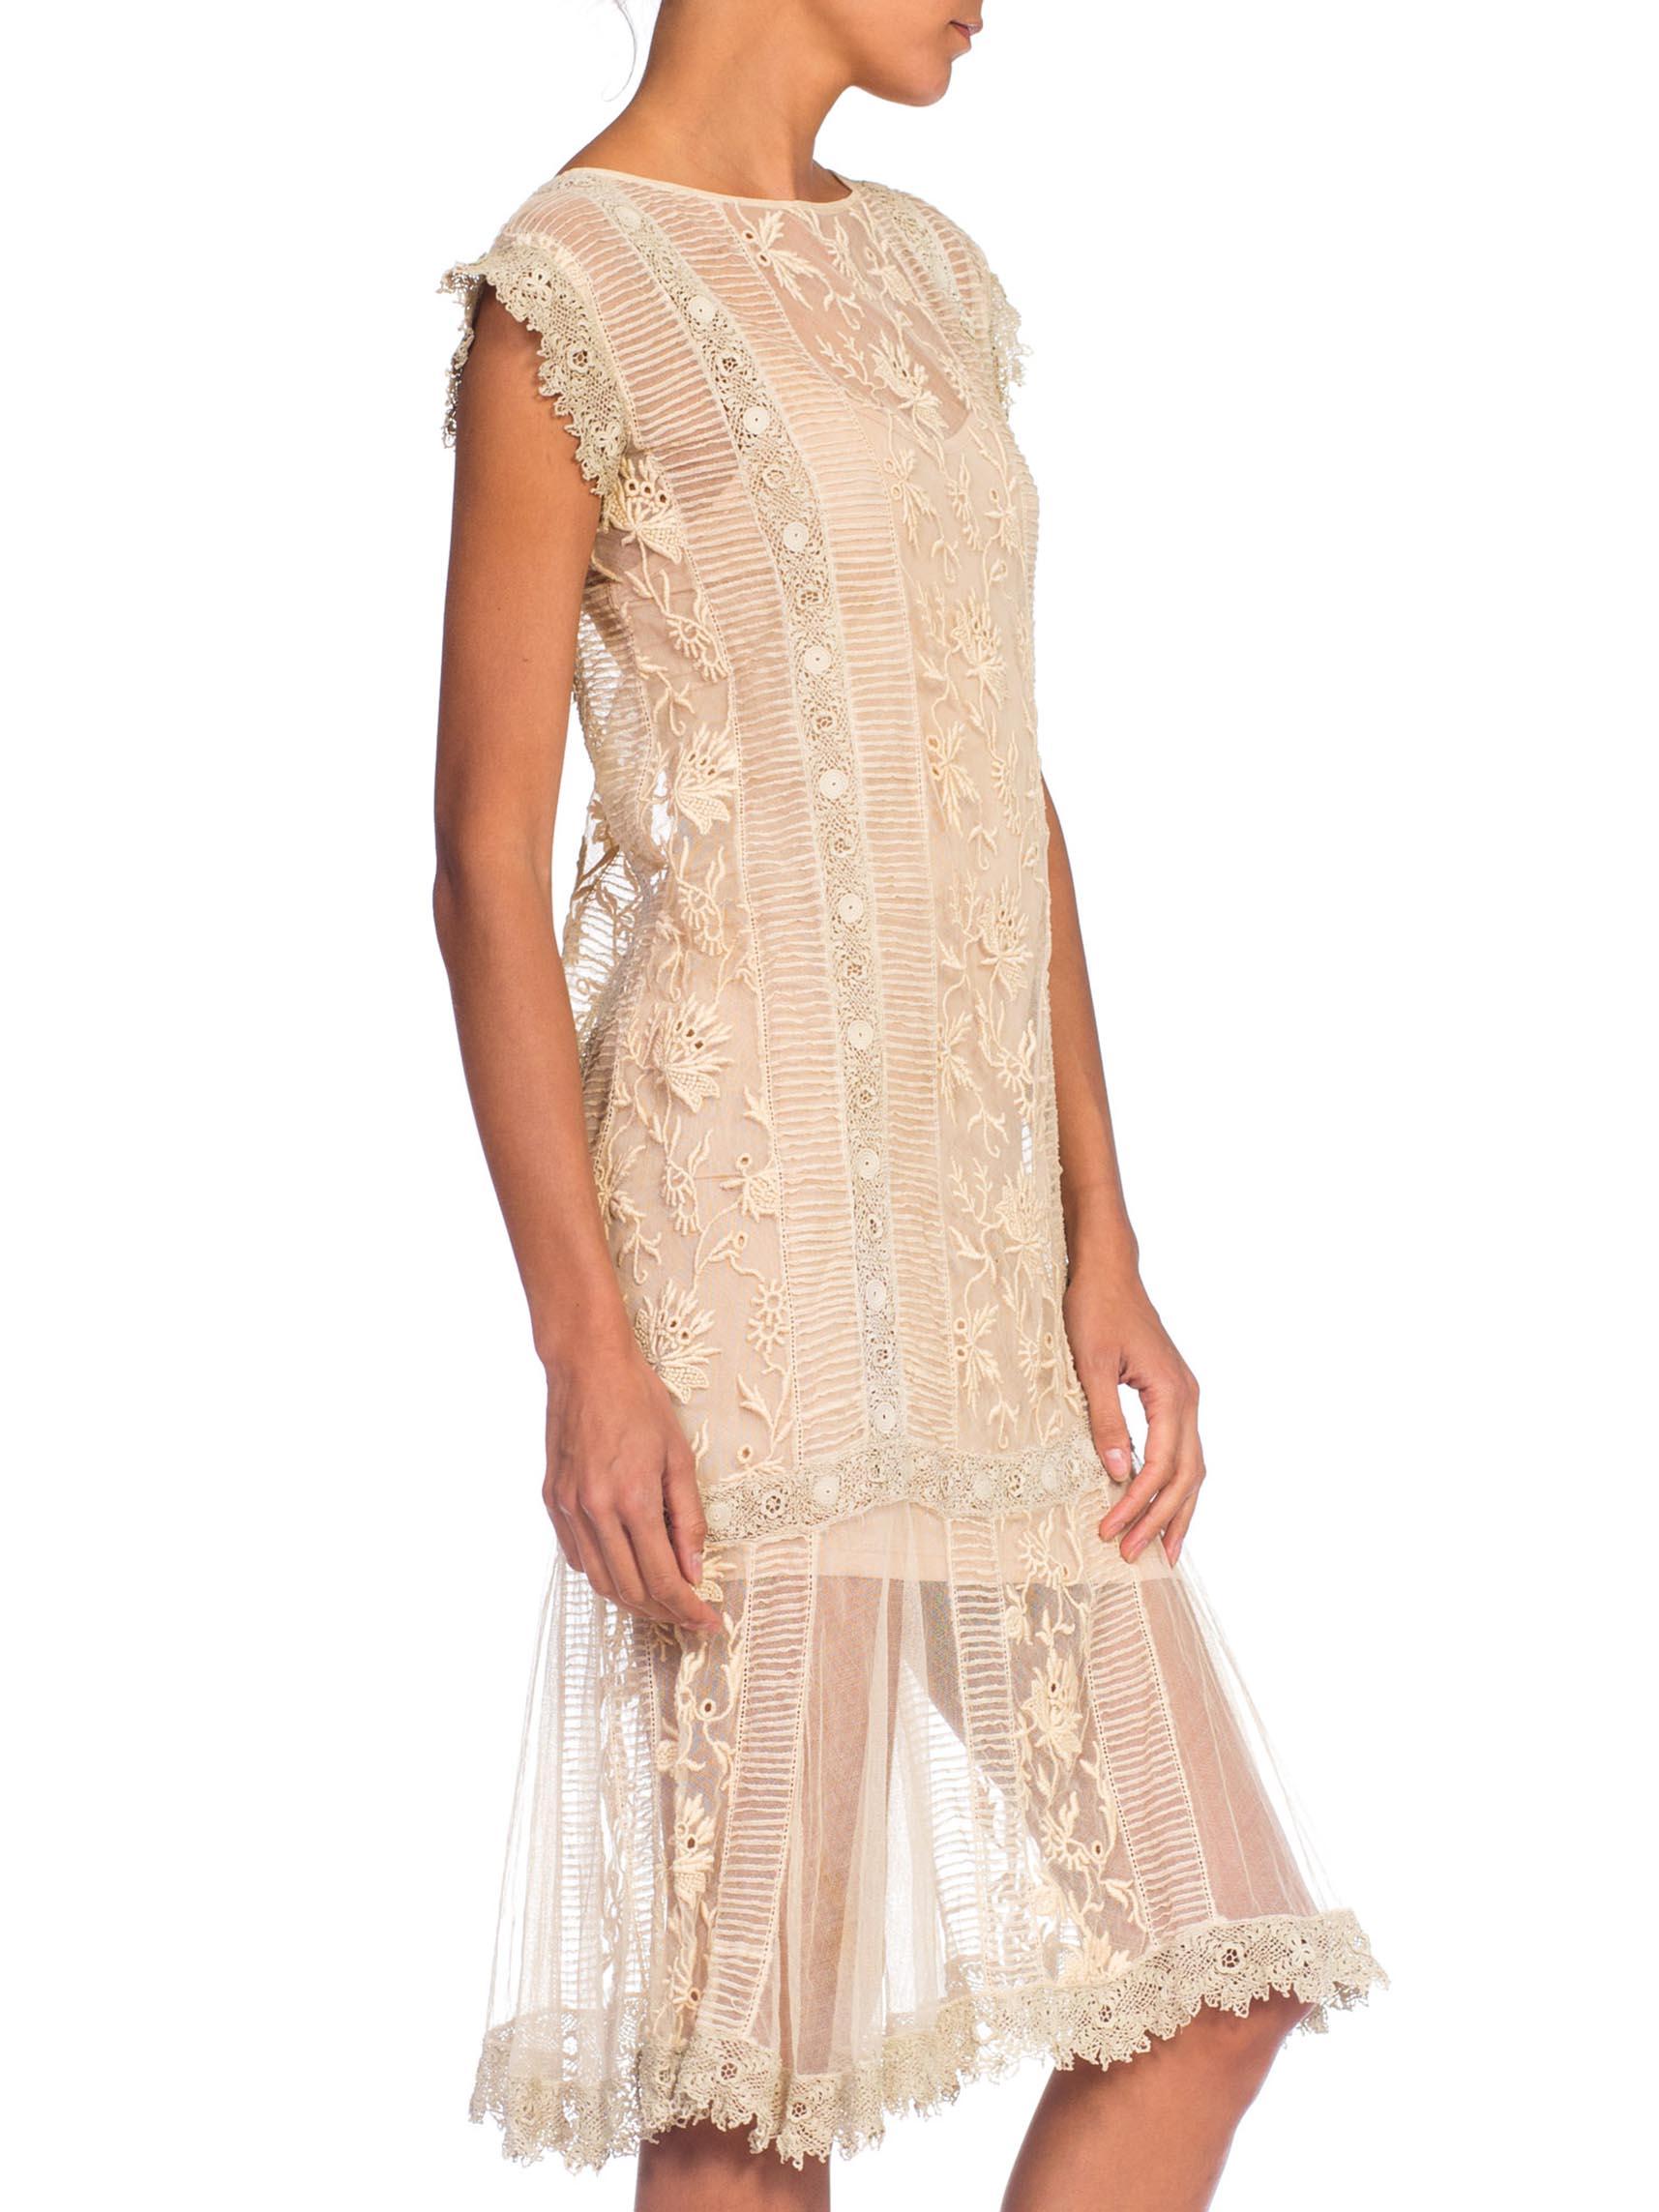 1920S  Cream Embroidered Cotton Net Gatsby Lawn Party Dress With Handmade Irish Crochet Lace